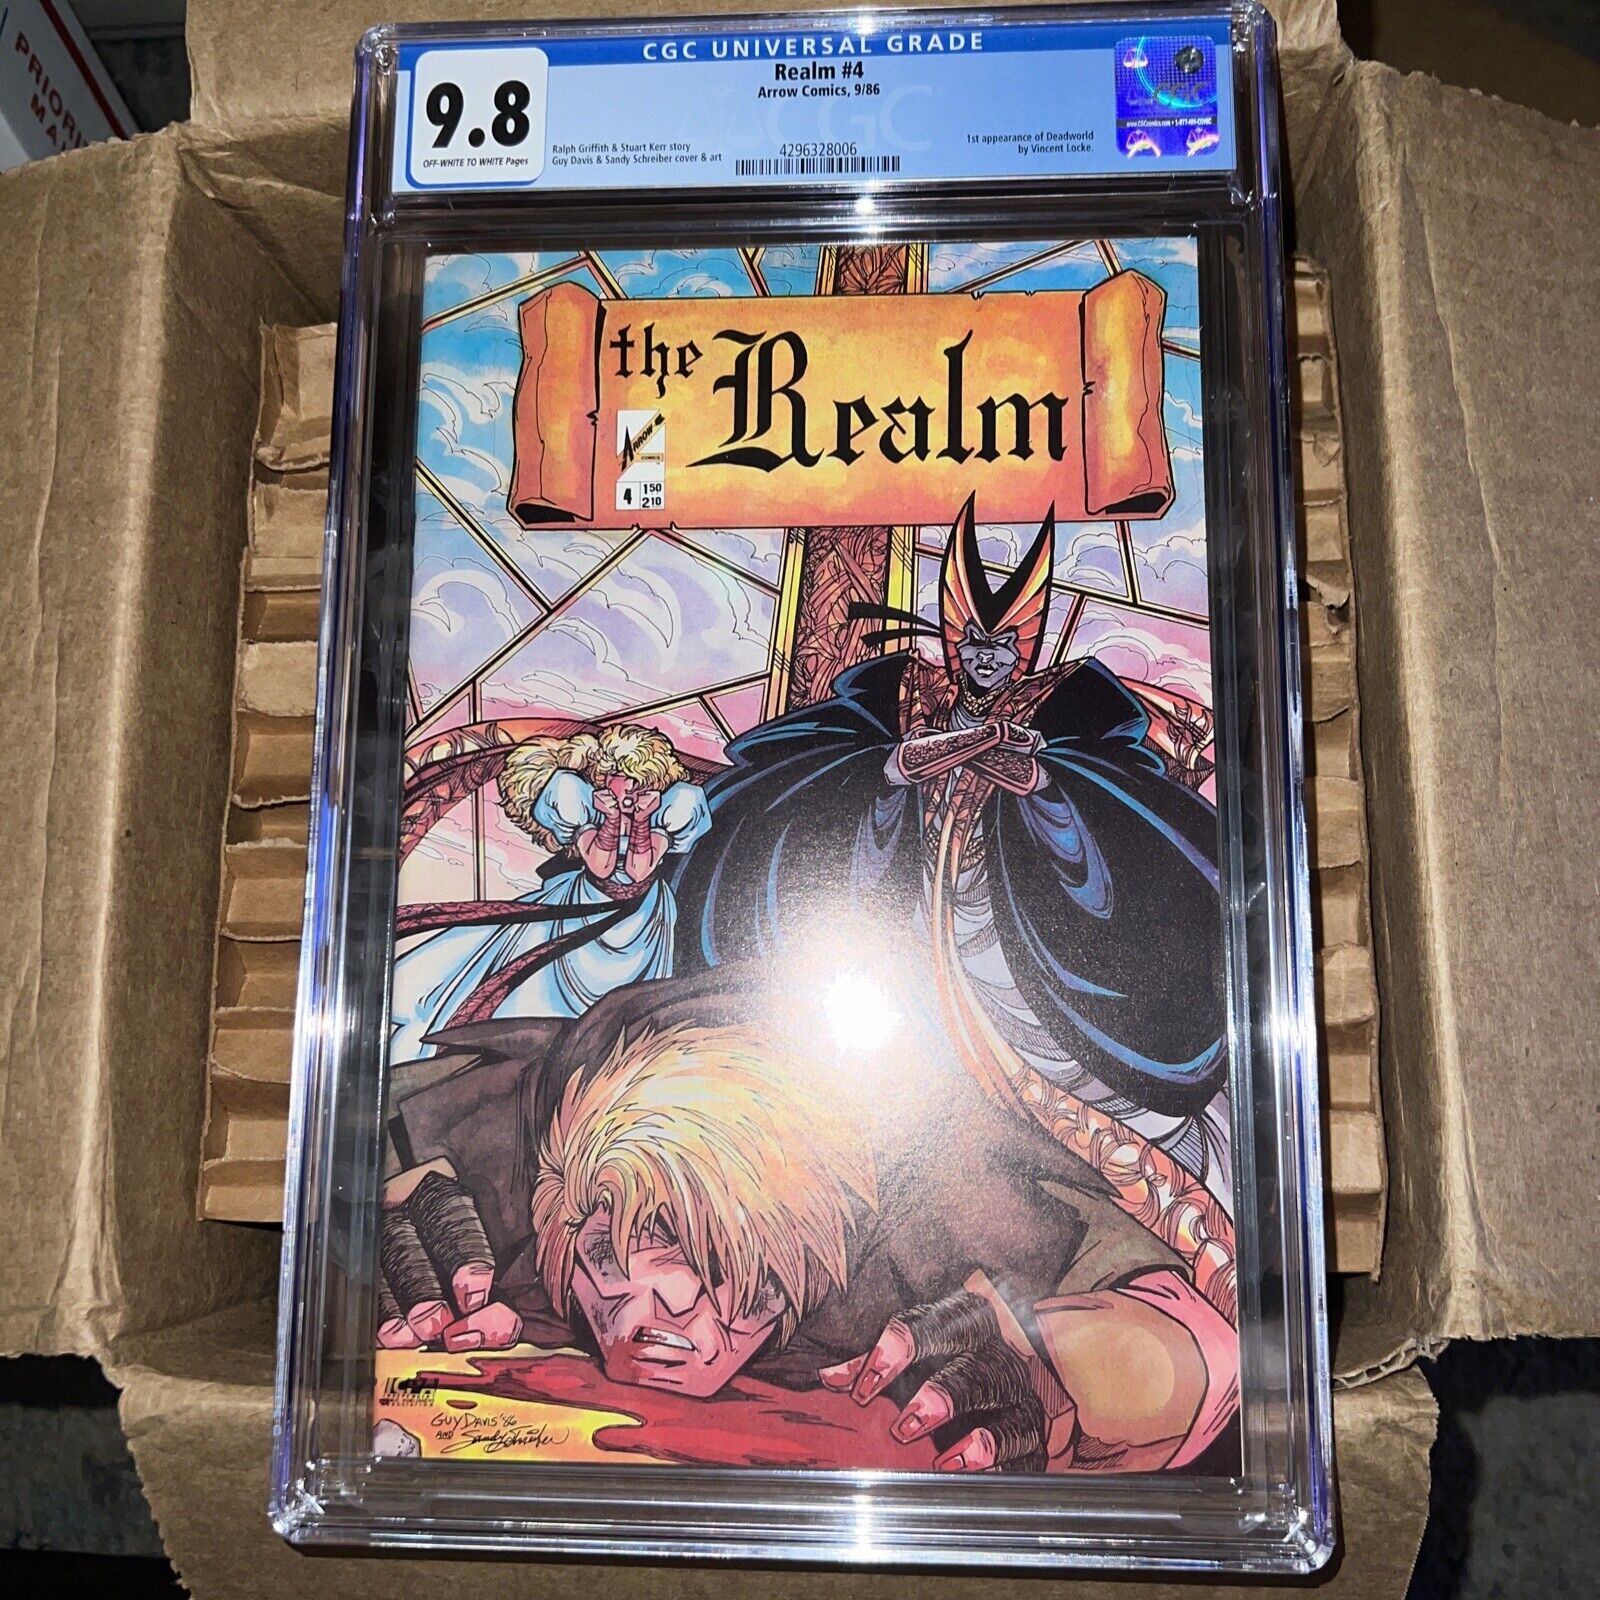 THE REALM #4 CGC 9.8 ARROW COMICS HARD TO FIND IN CGC 9.8 1ST PRINT